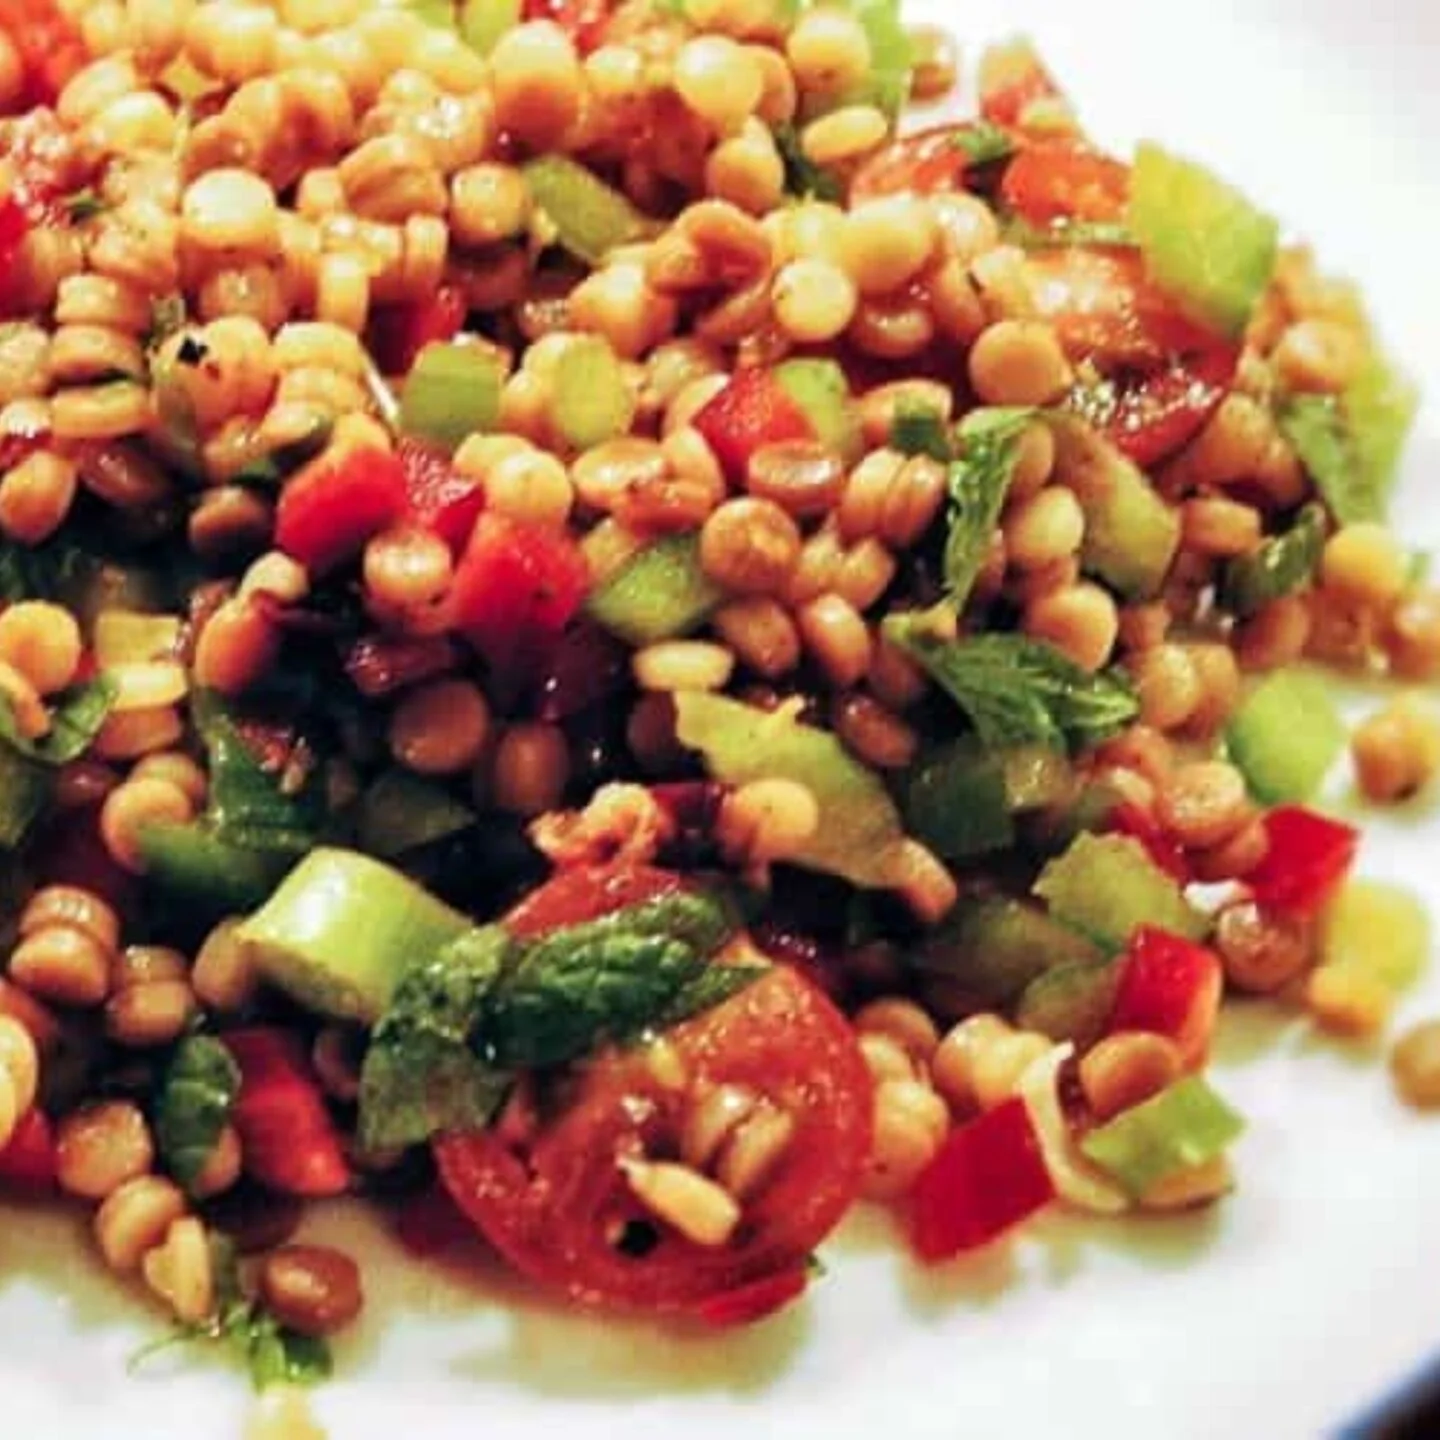 17. Couscous Salad with Chopped Vegetables, Mint, and Cilantro